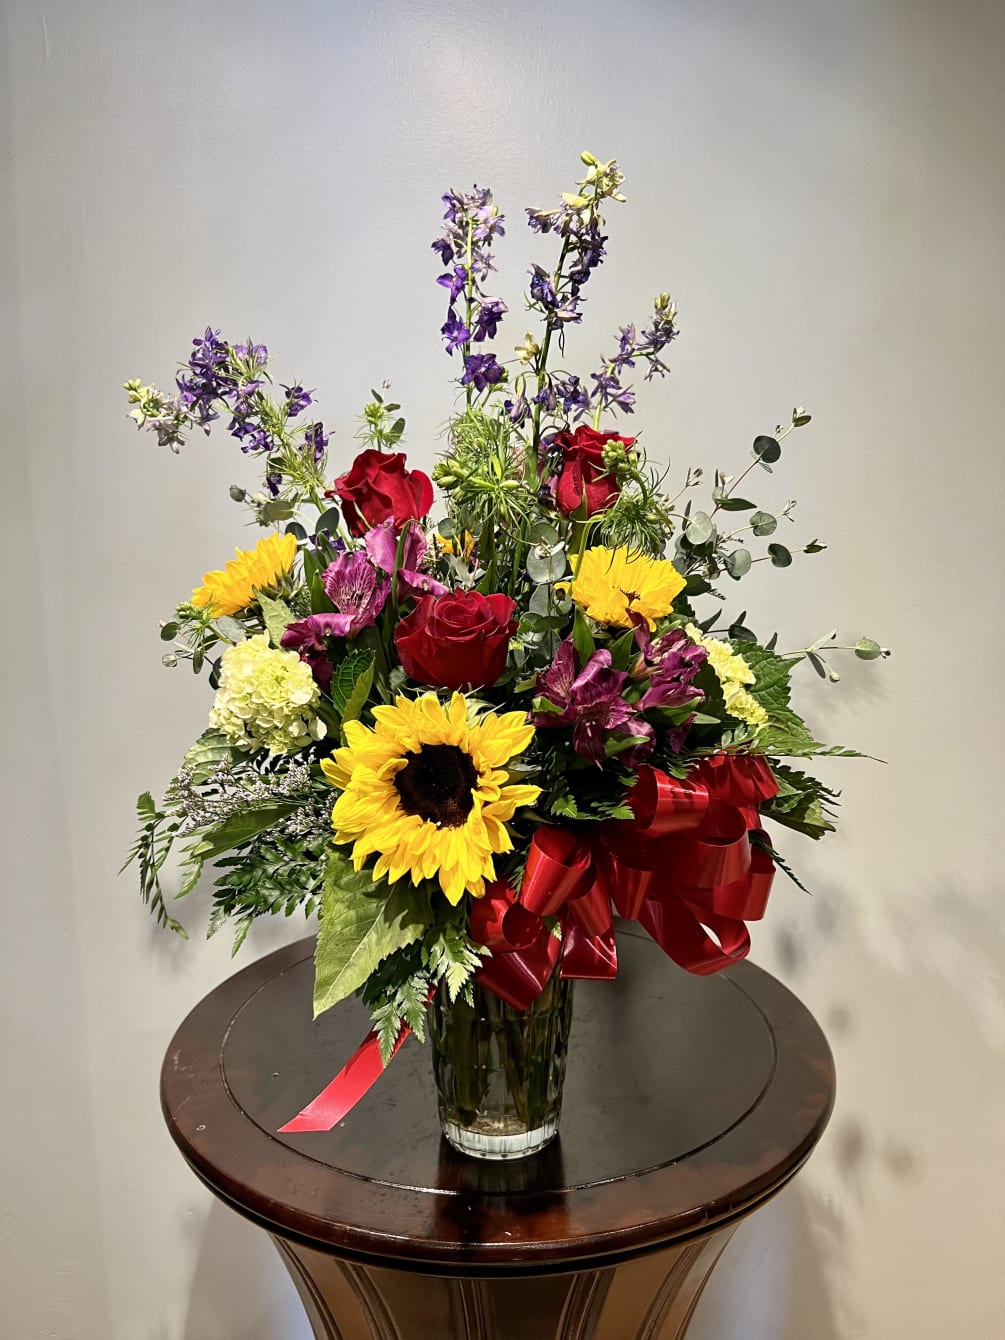 Be unique with this romantic wild flower mix. This beautiful bouquet features